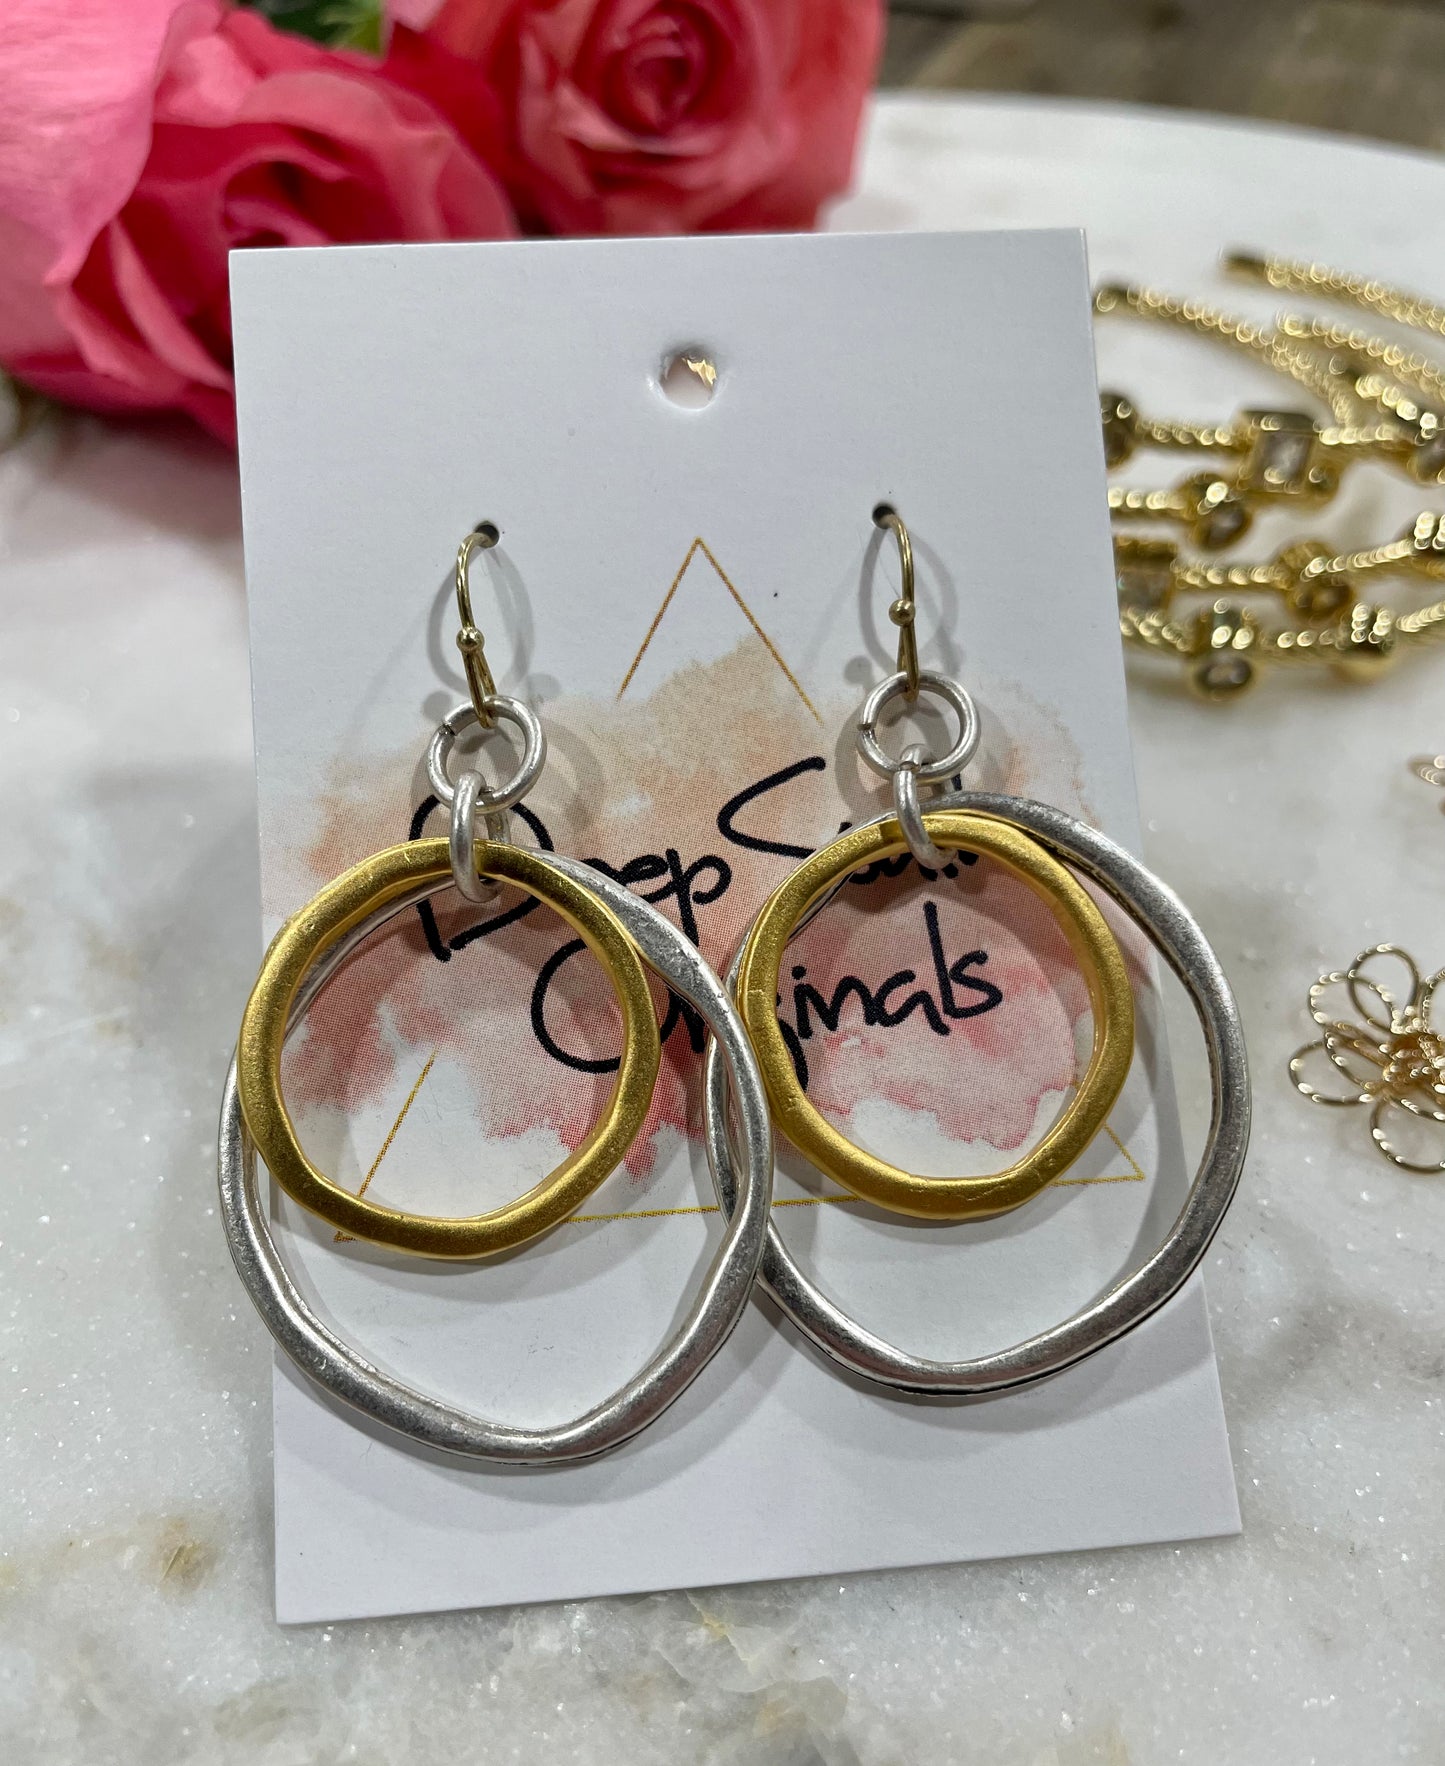 Double Circle Earrings - Small Gold Circle inside a Larger Silver Circle from Deep South Originals - Deep South Originals